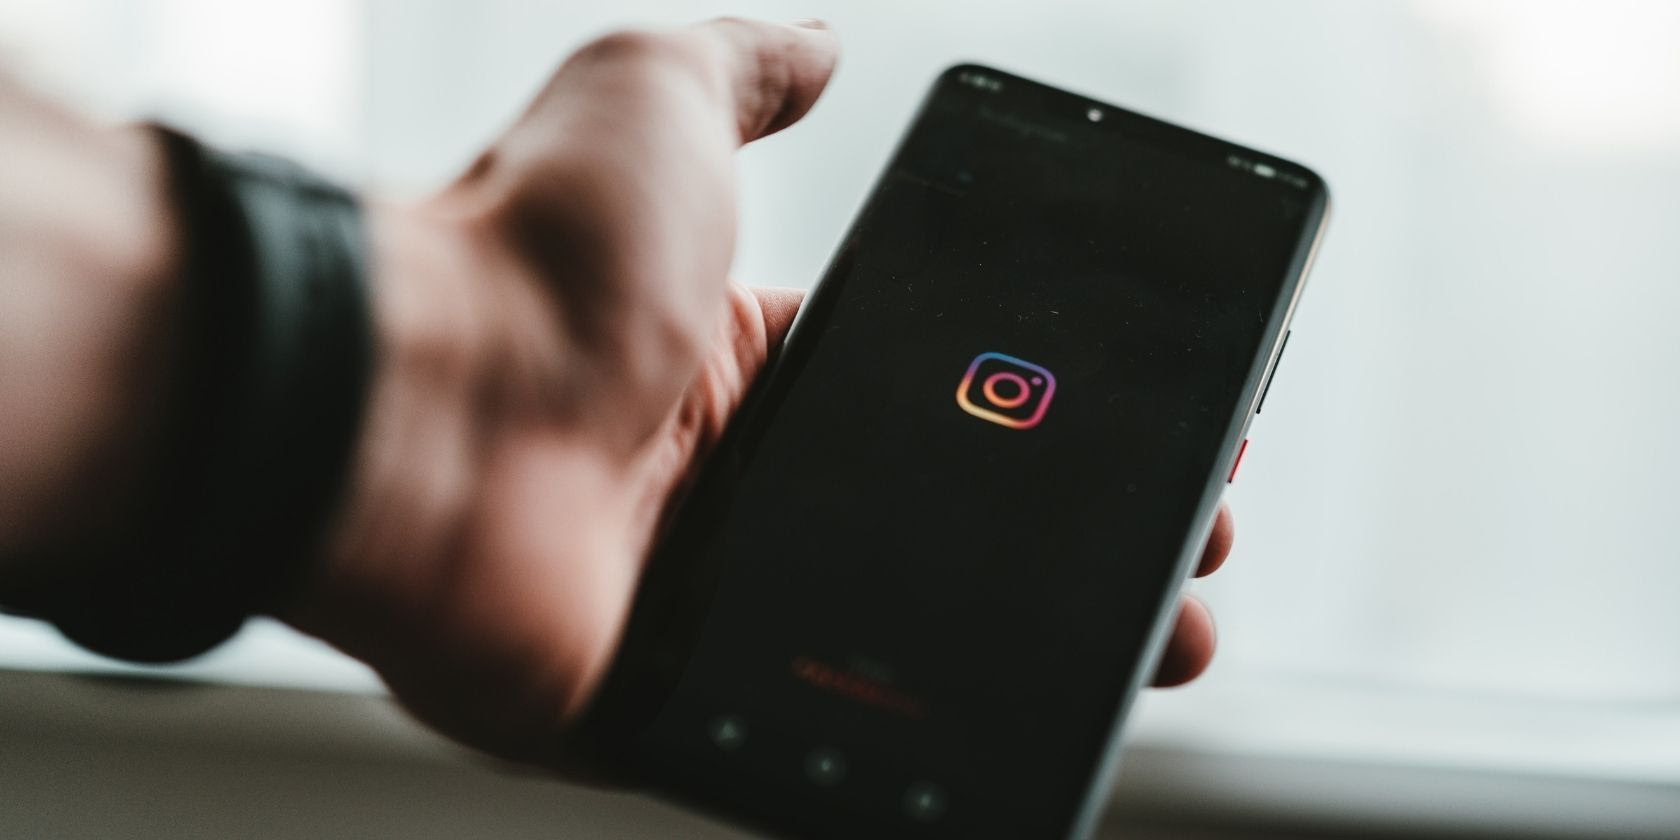 What Can Get Me Shadowbanned on Instagram?